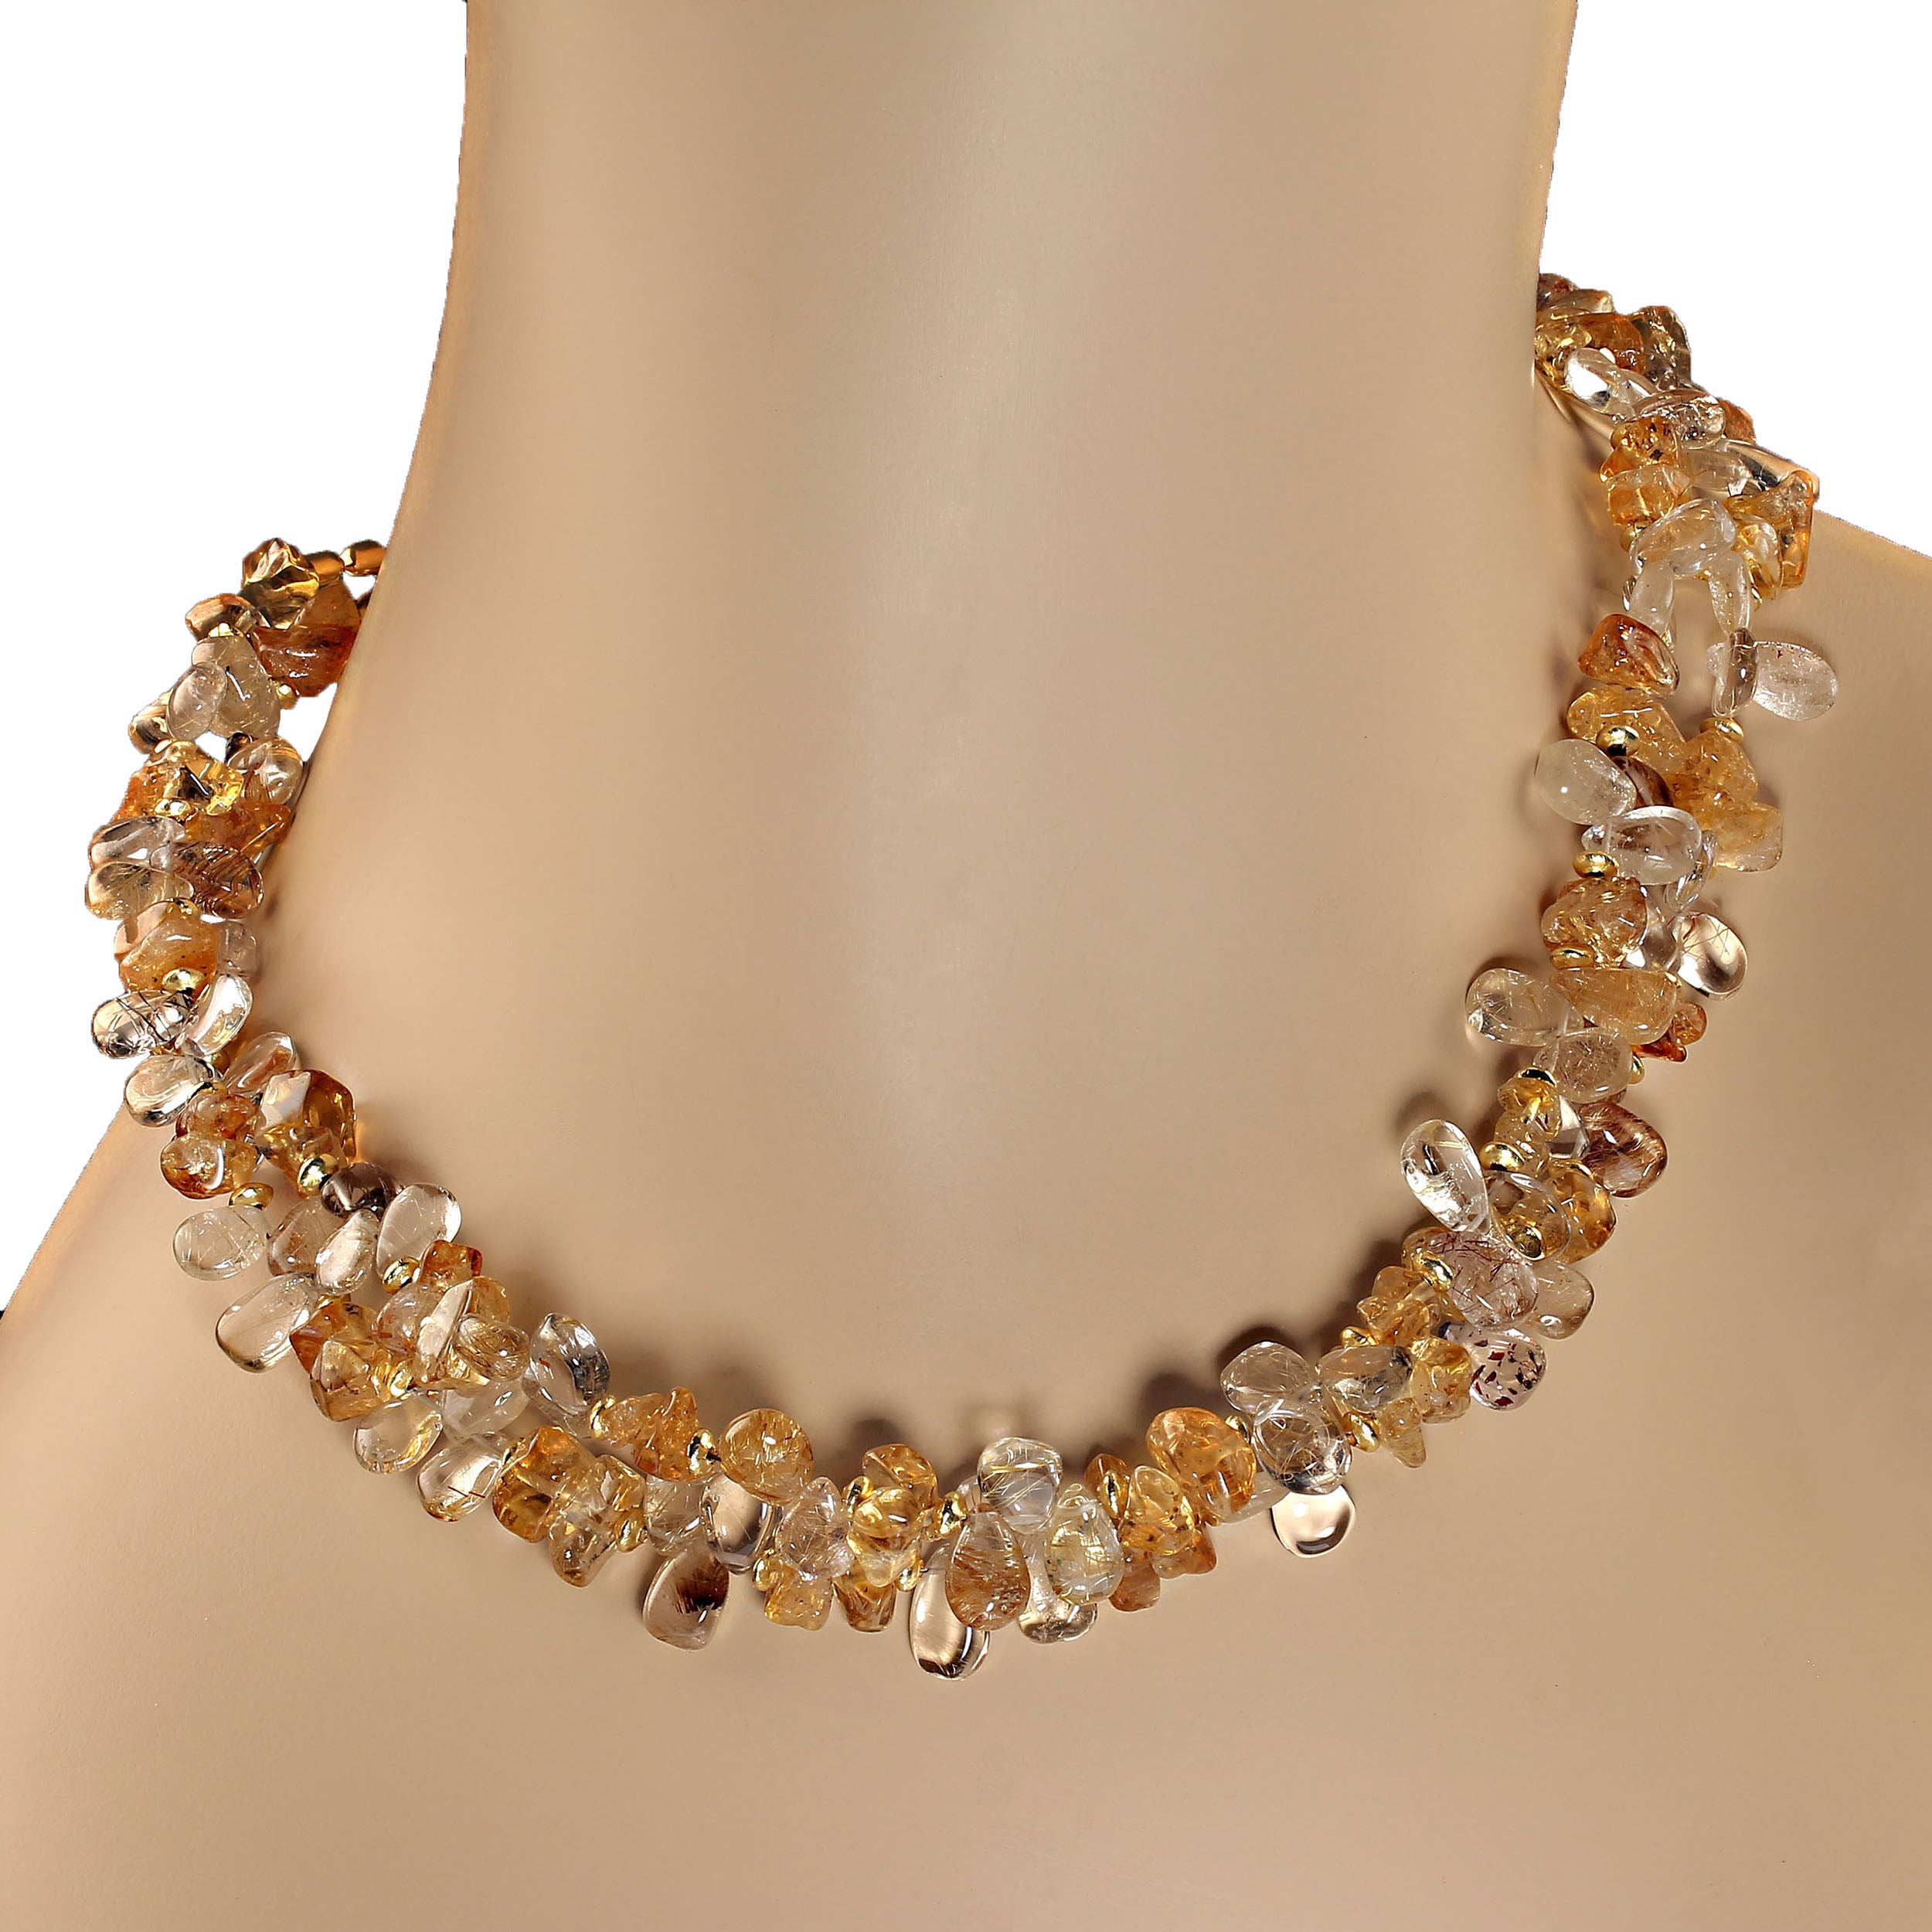 18 Inch two strand necklace of highly polished briolettes of rutilated quartz, 8x7mm, polished, tumbled citrine chips, and goldy spacers. The necklace is finished with a gold vermeil clasp with diamond chips. This necklace creates a lovely sparkly